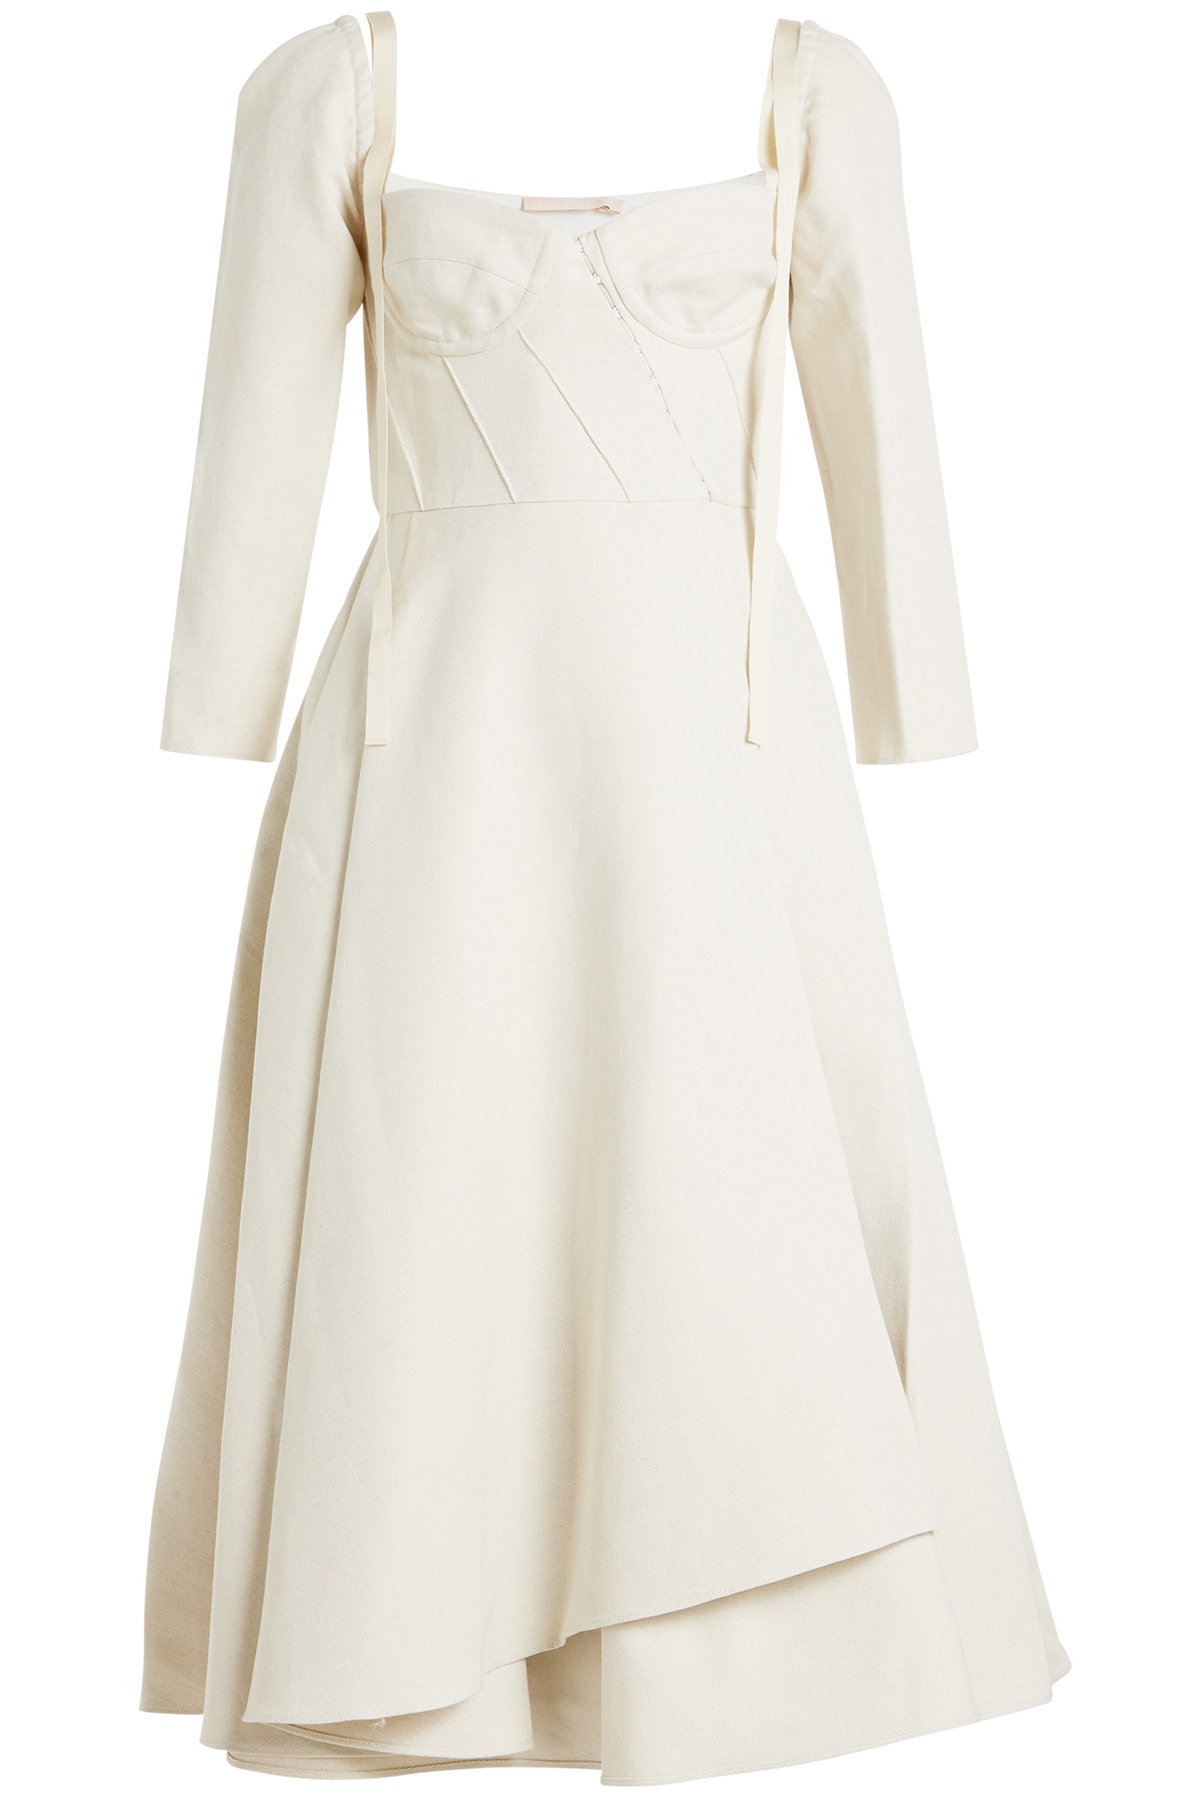 BROCK COLLECTION - Devin Dress in Linen and Cotton